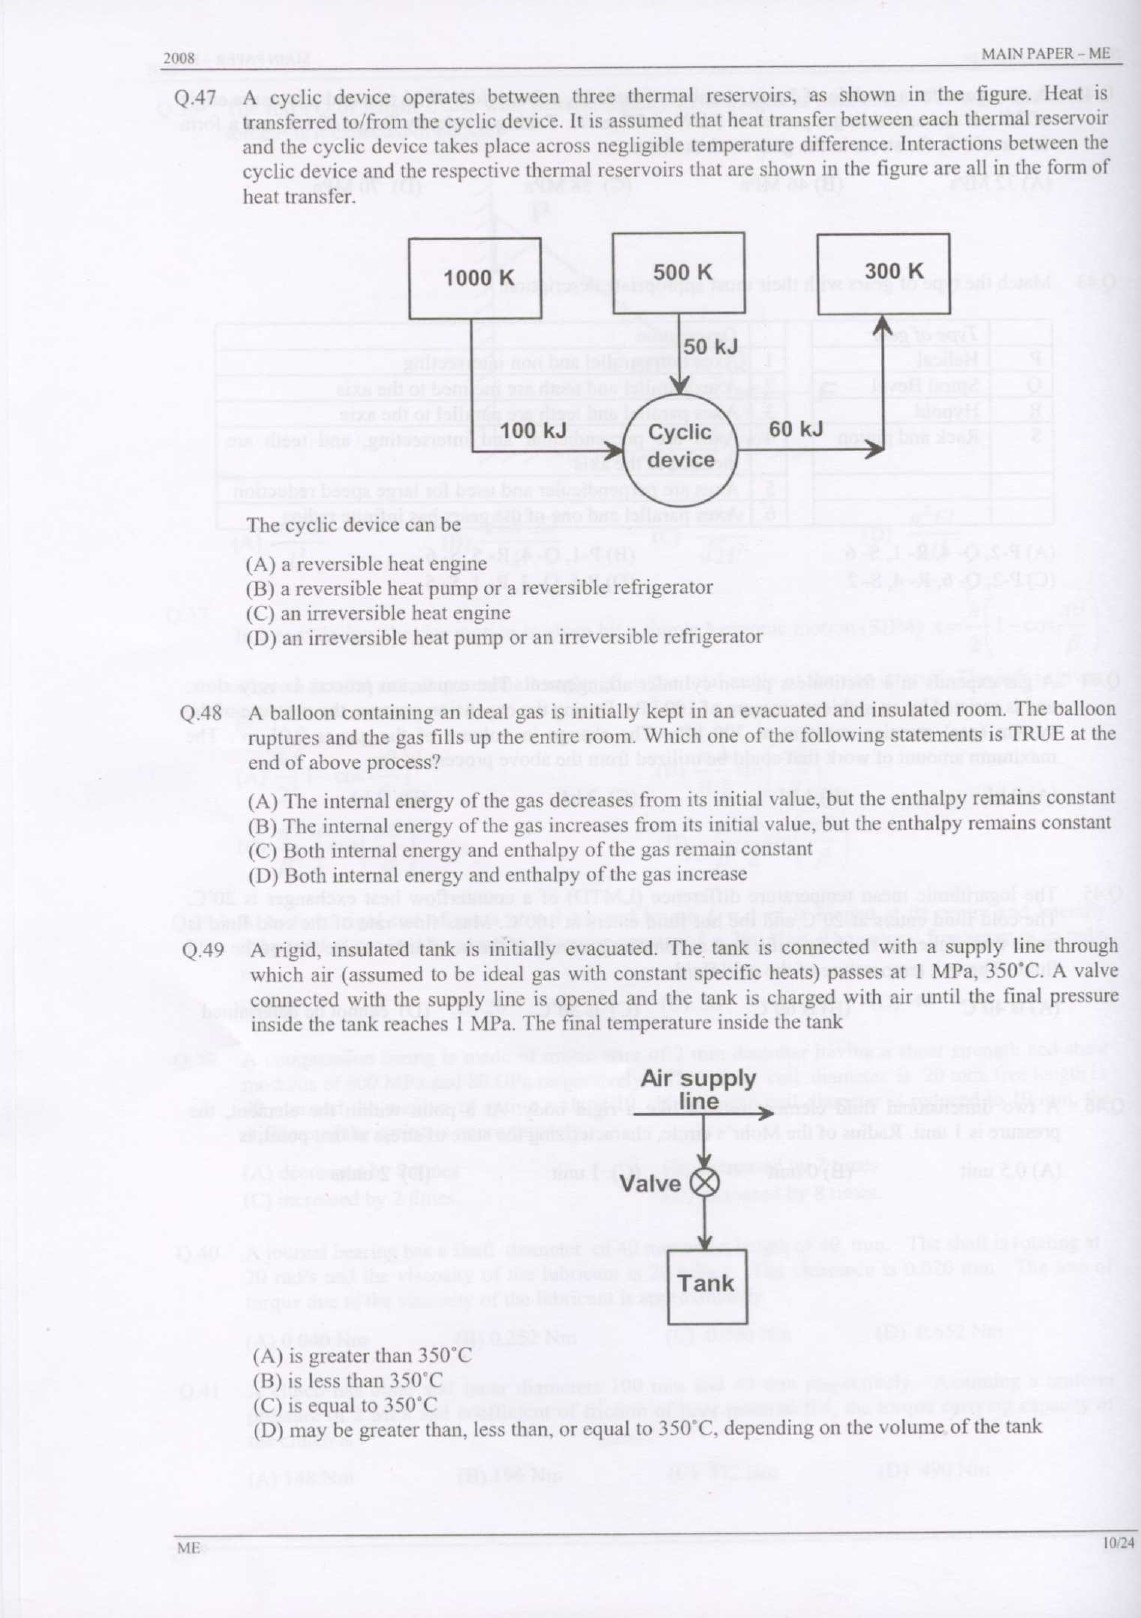 GATE Exam Question Paper 2008 Mechanical Engineering 10